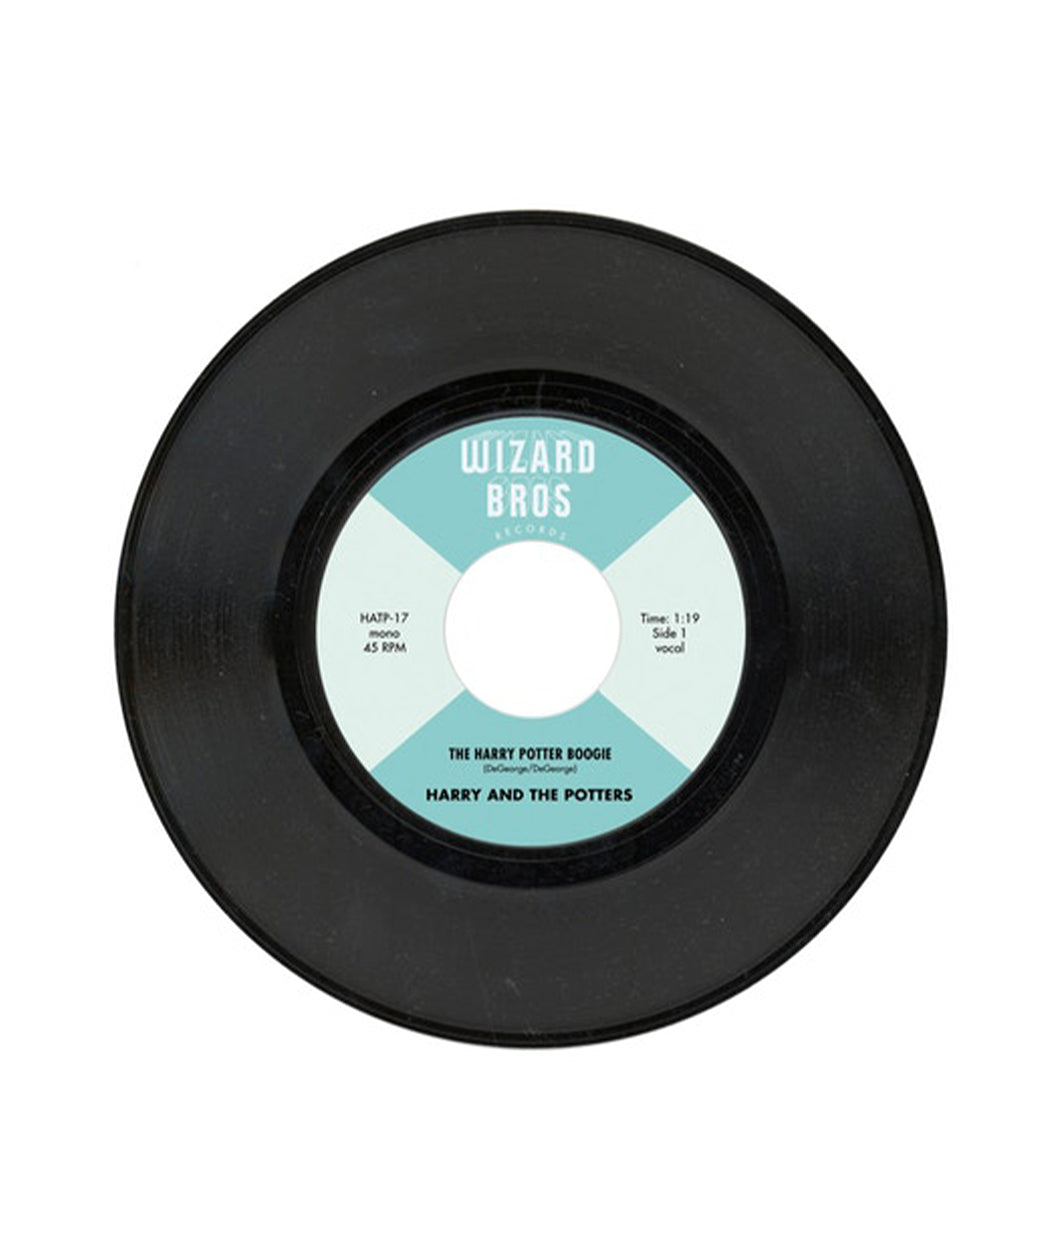 A black 45 record with a blue label that reads 